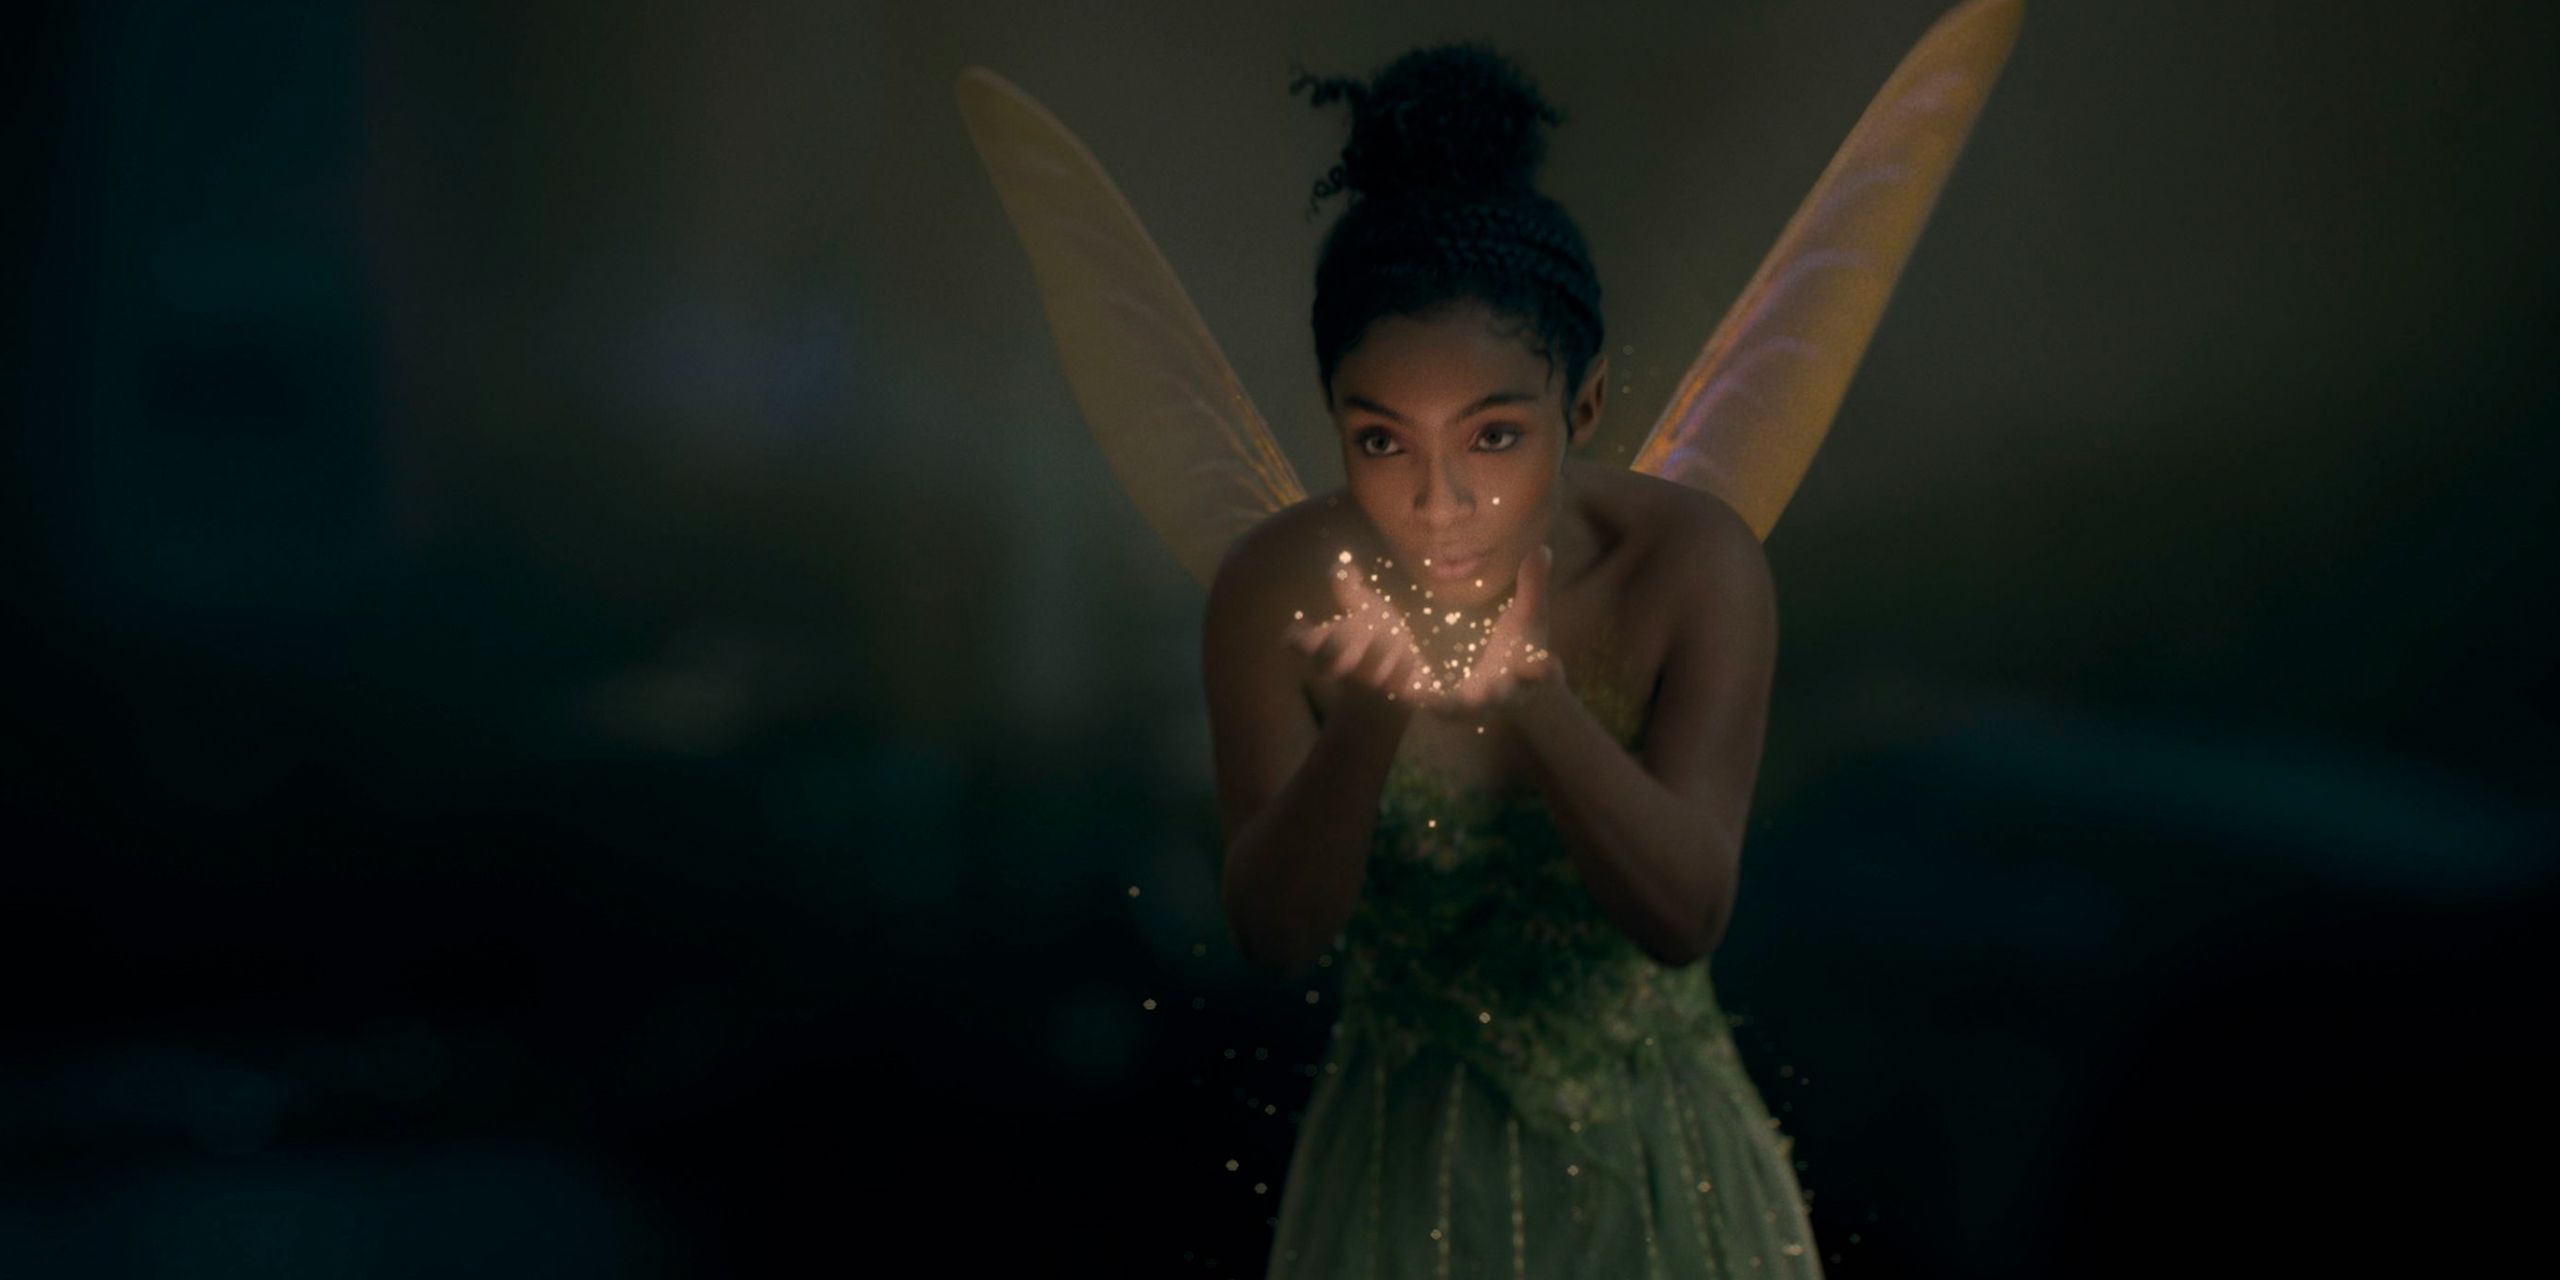 Yara Shahidi as Tinkerbell with pixie dust in Peter Pan and Wendy